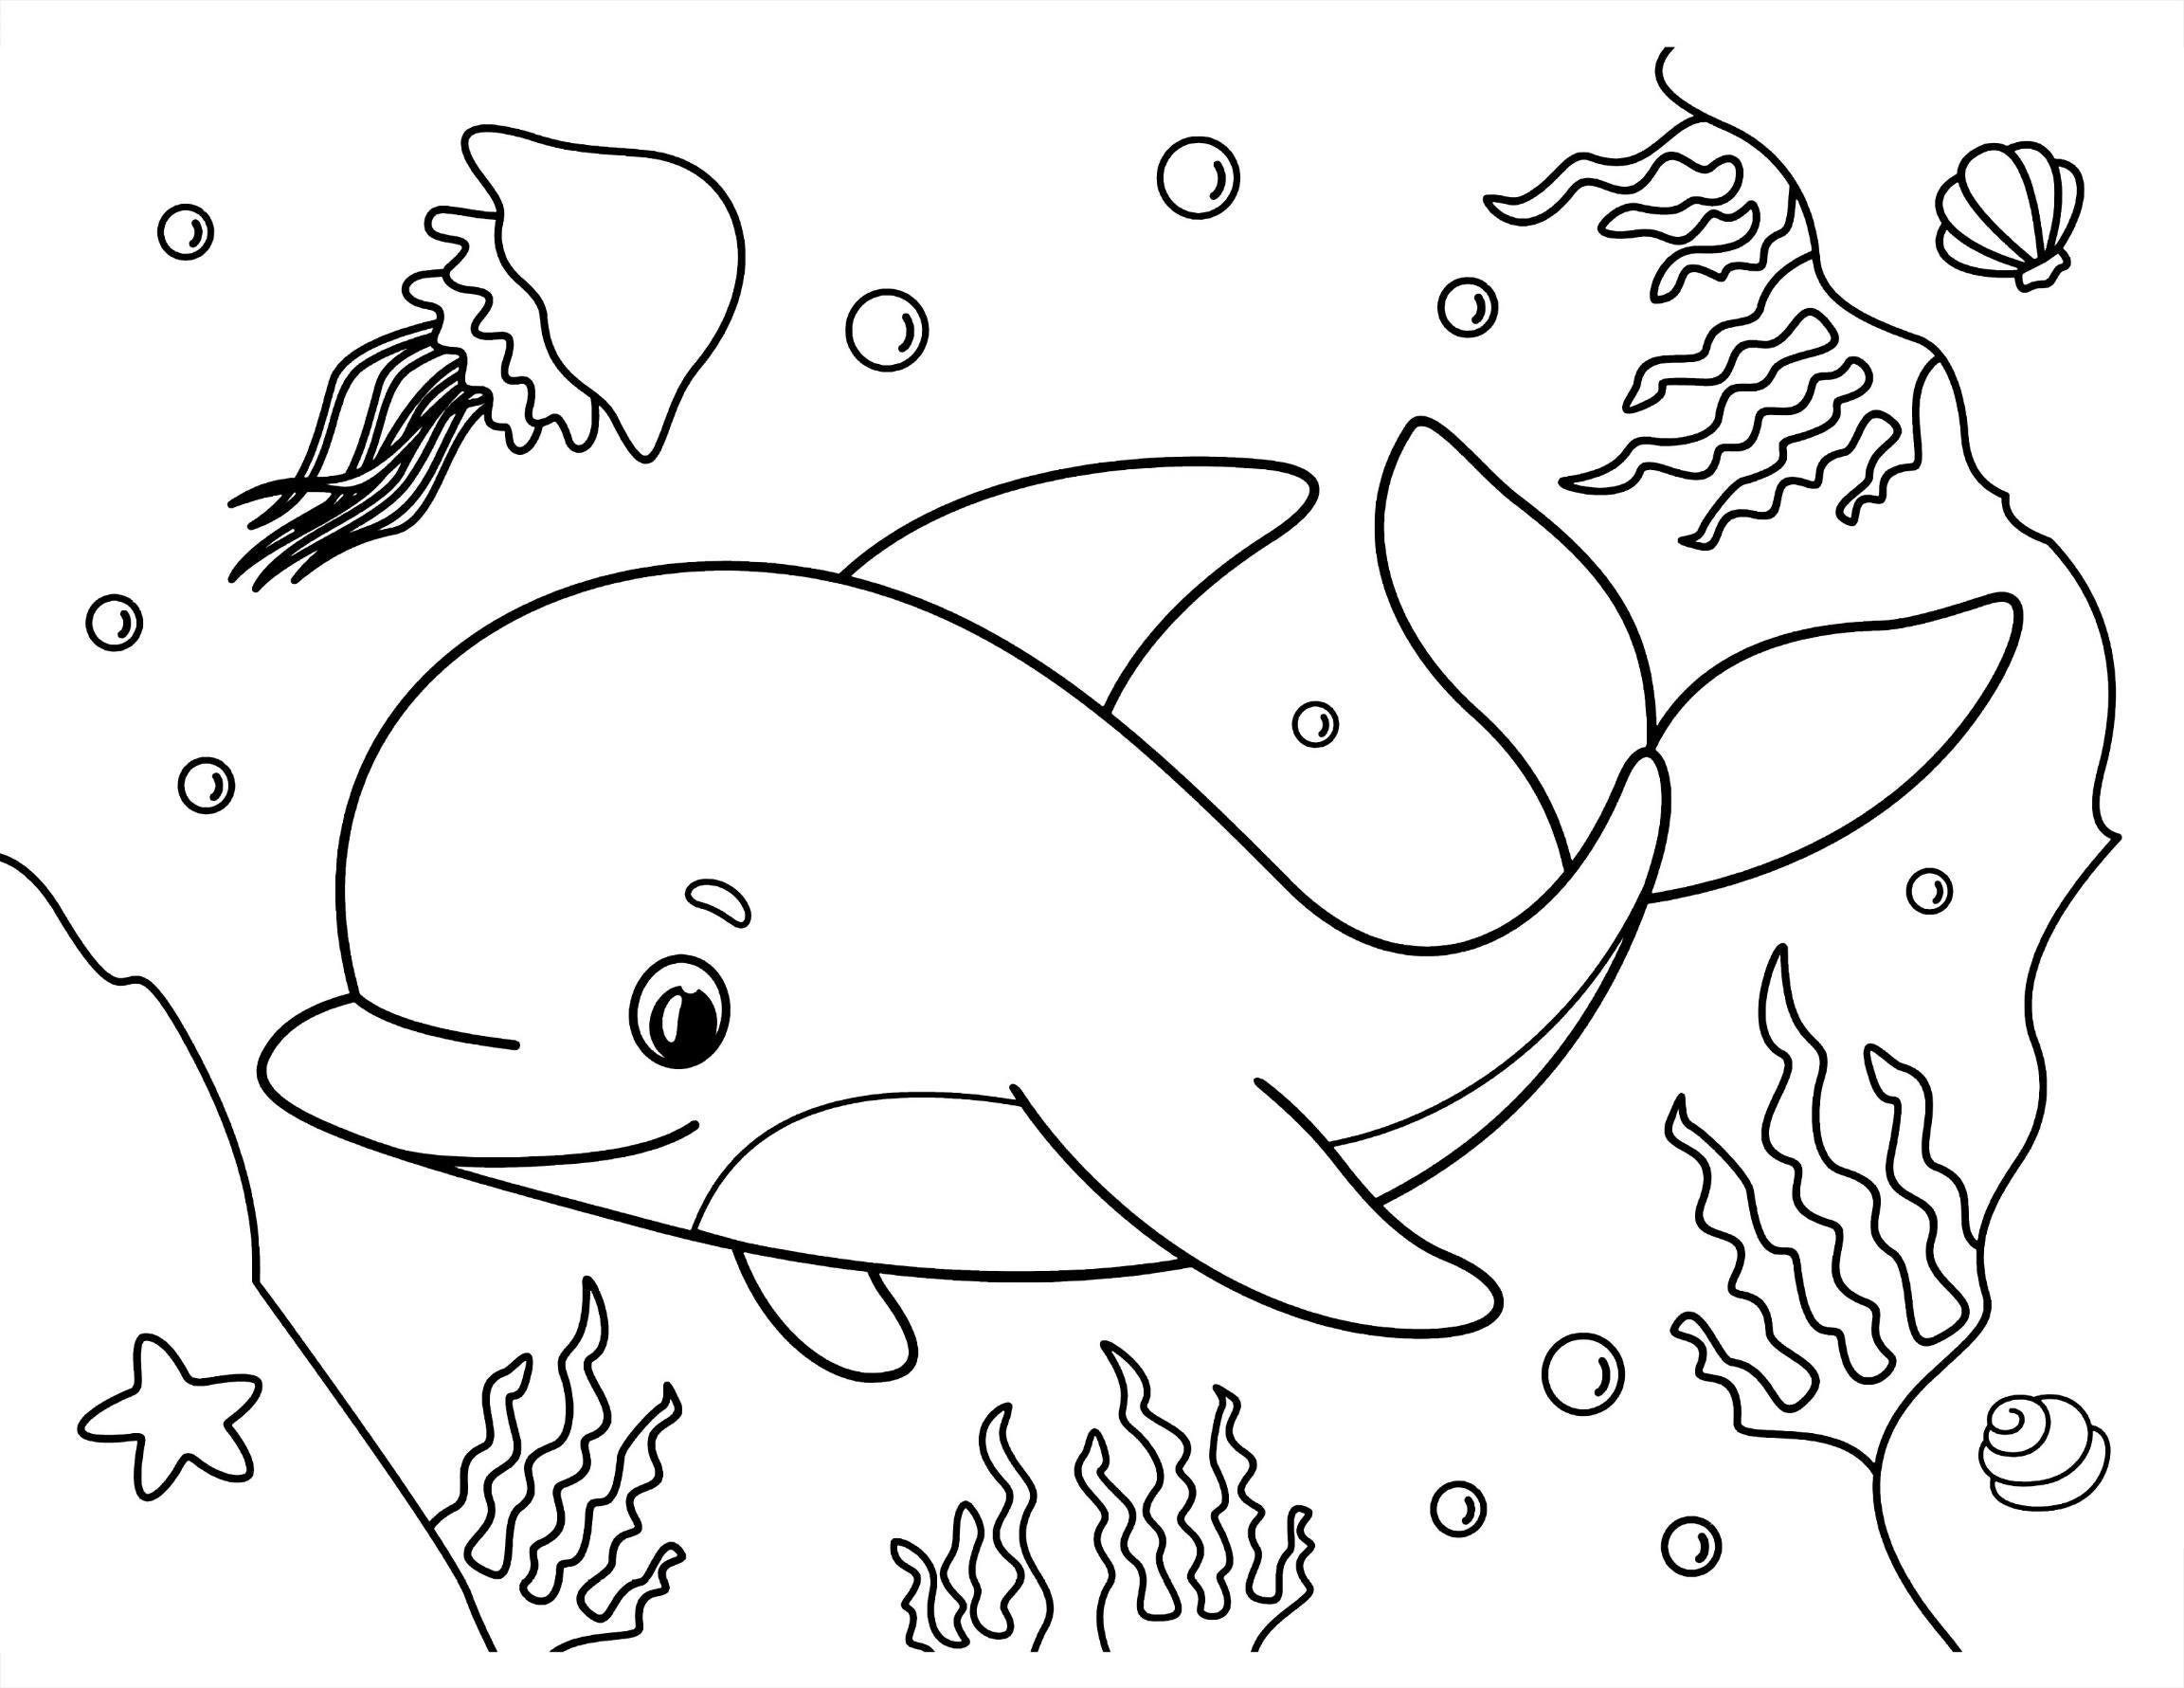 Barnes and Noble Dolphin Big Coloring Book For Kids Ages 3 - 8: Drawing,  Activity Book For Boys & Girls - Cute Dolphin Coloring Pages - Perfect Gift  for Kids ( 8.5